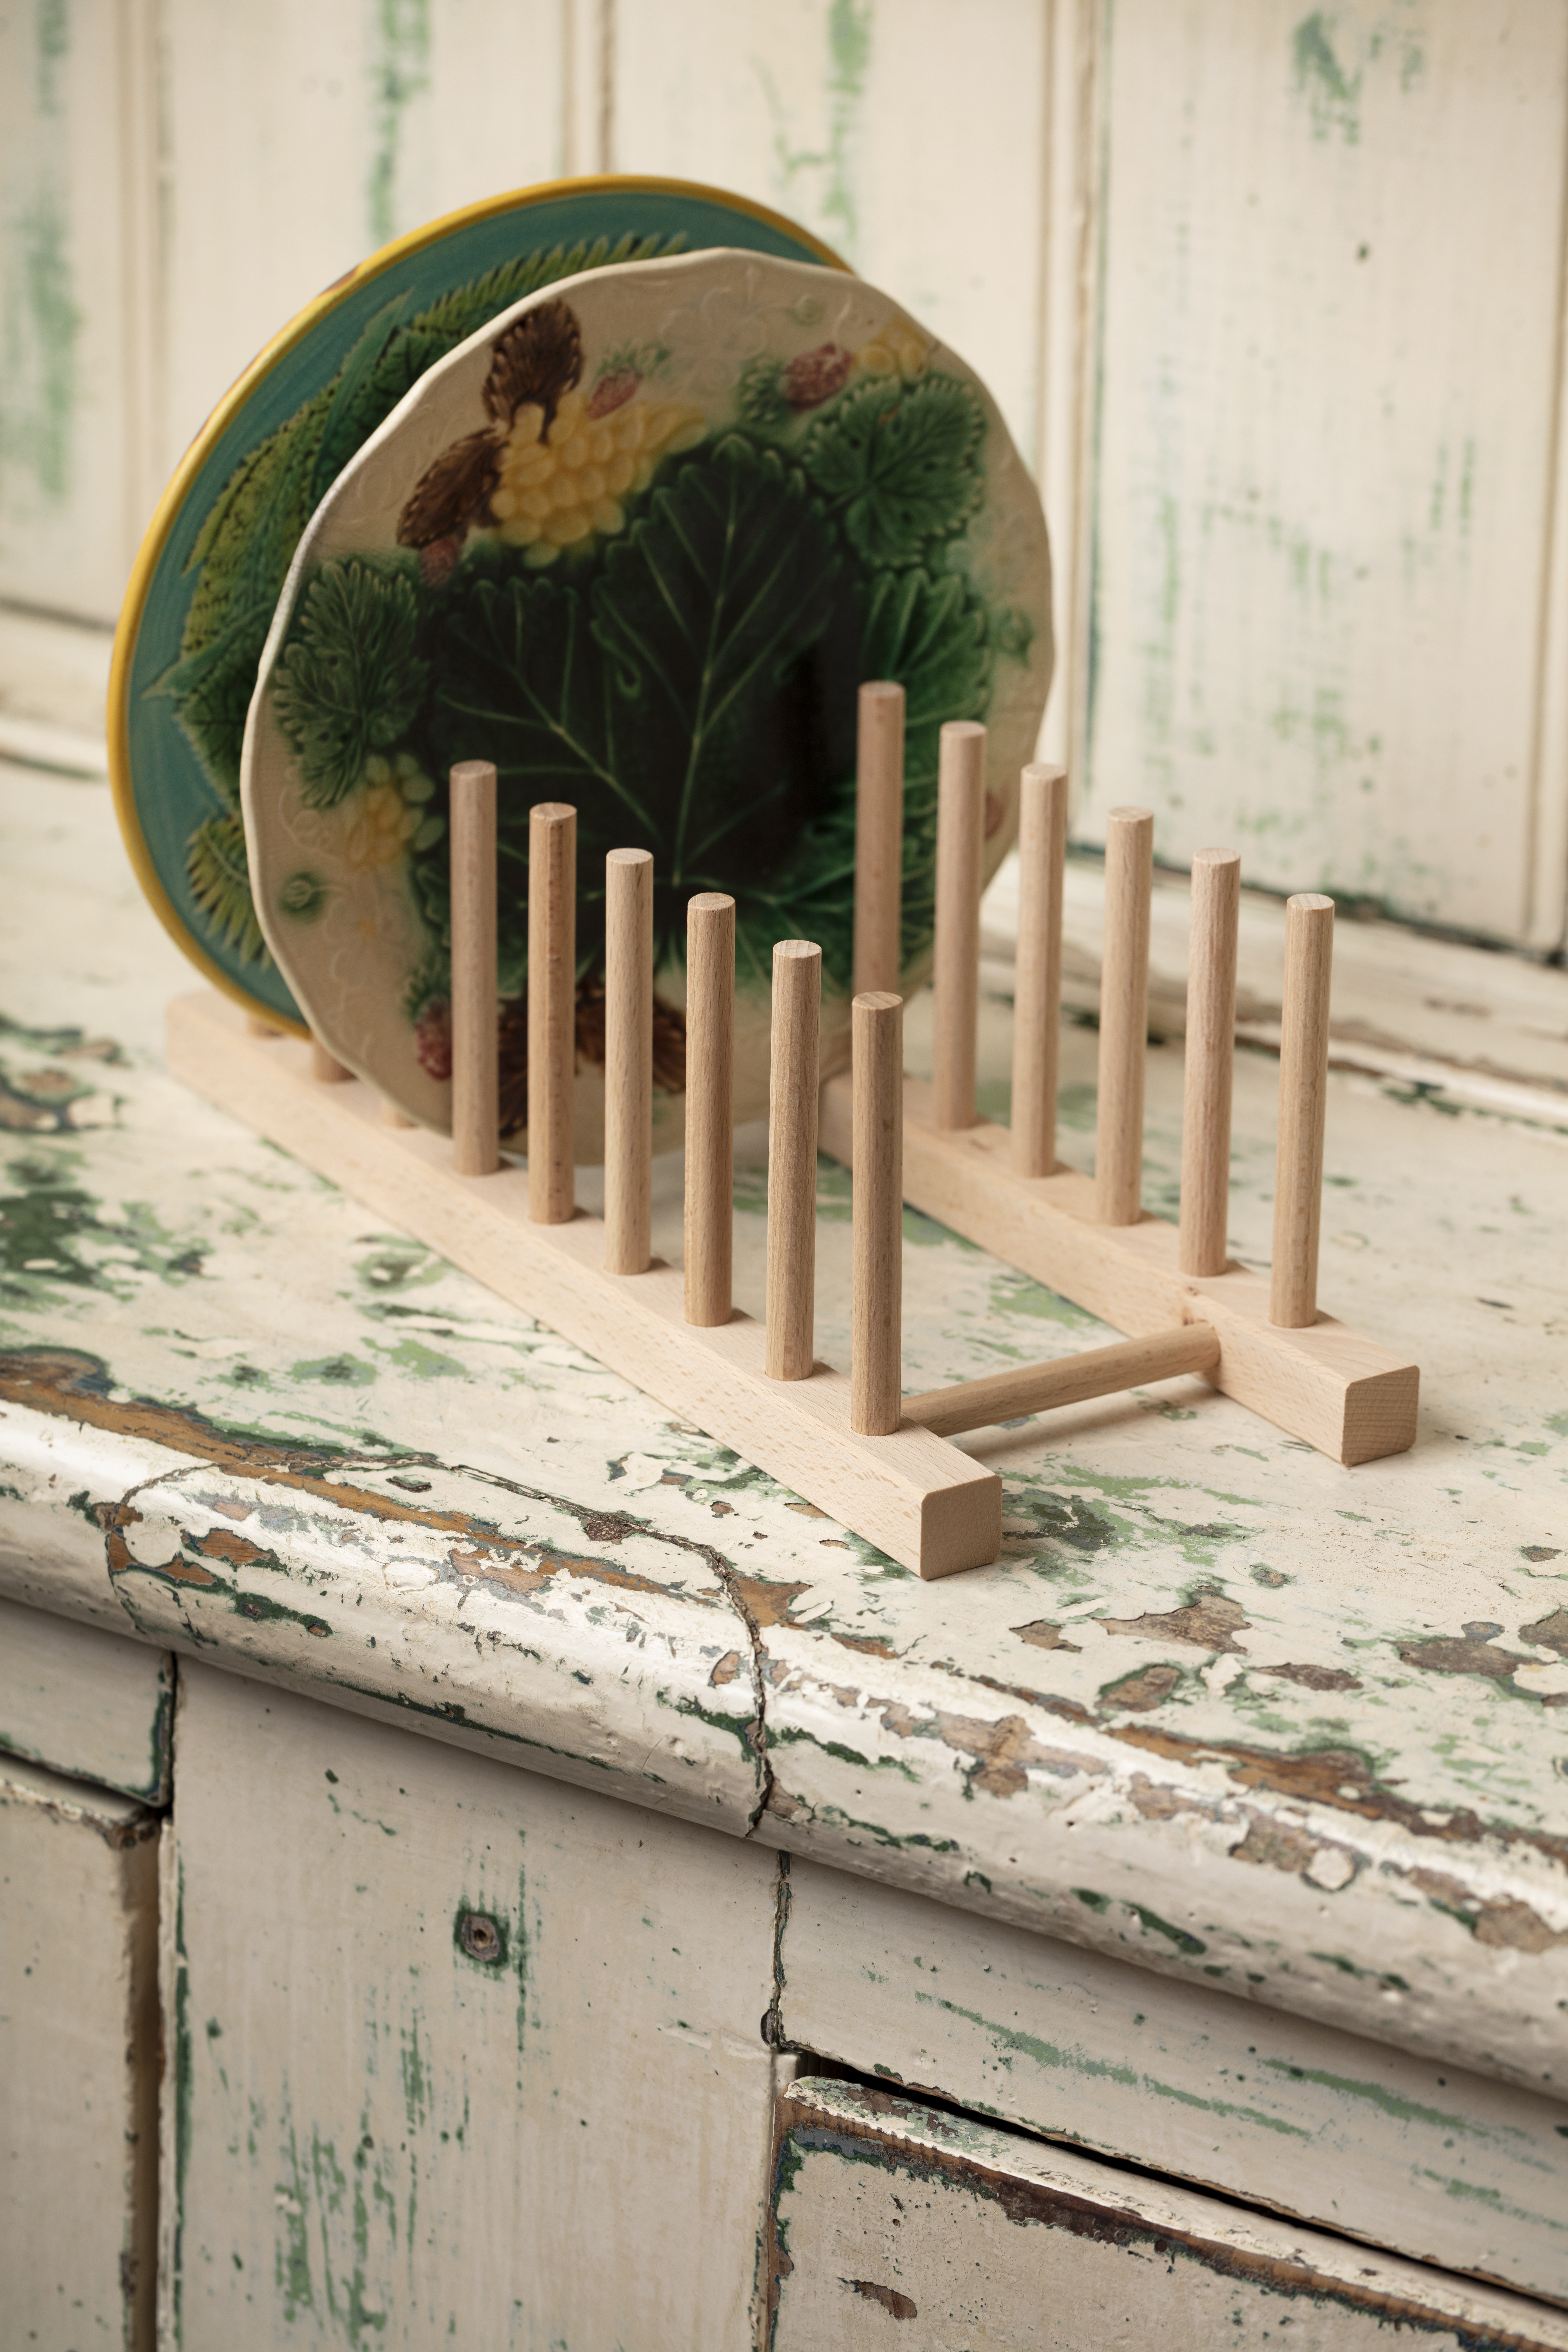 RE | REally unusual homeware | Online and Instore | RE-foundobjects